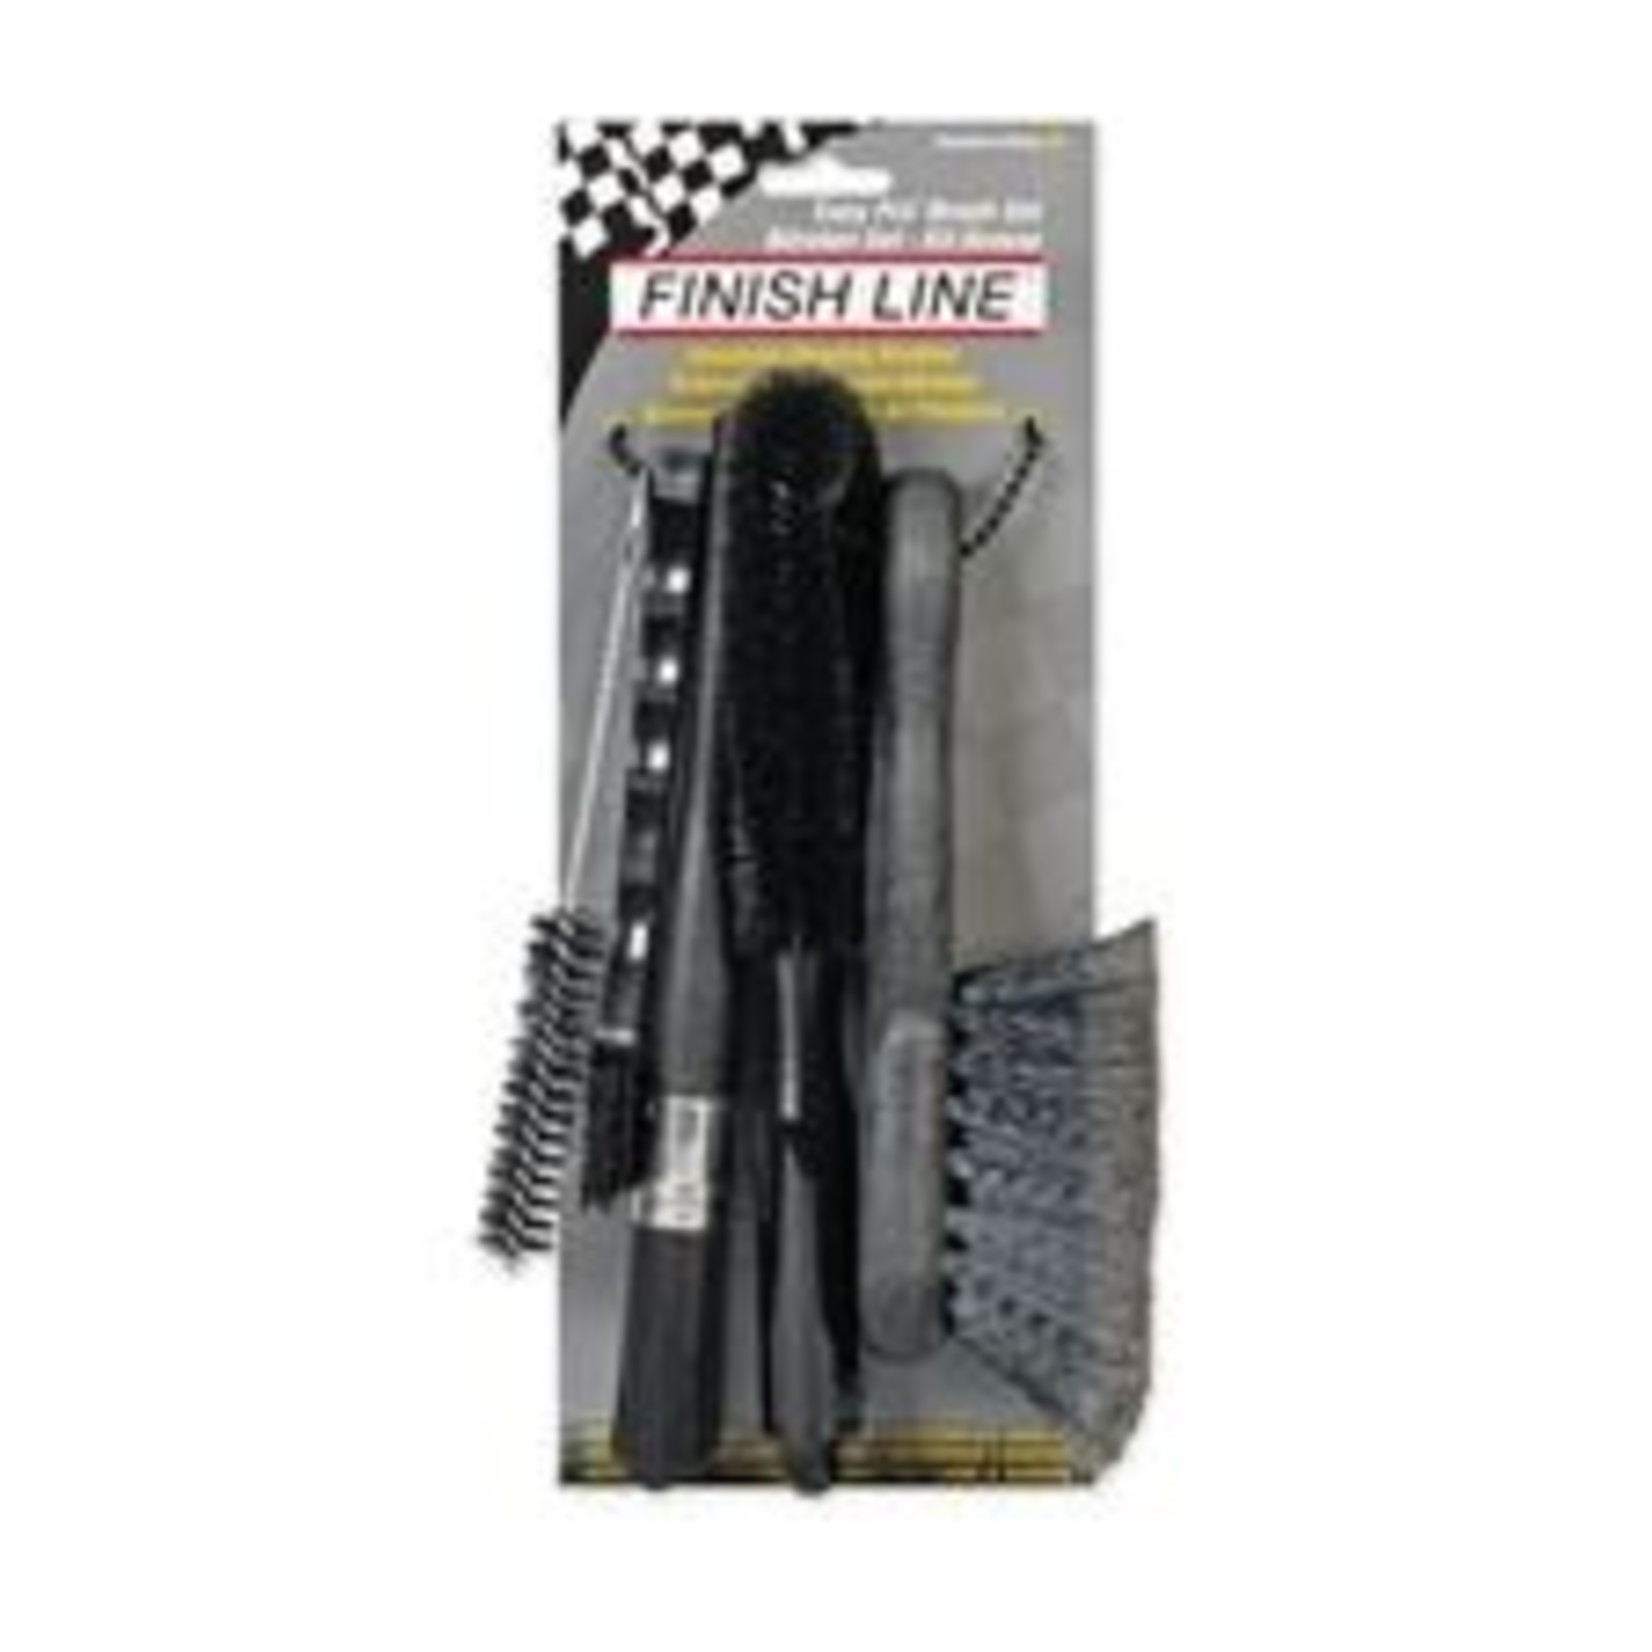 Finish Line Finish Line 5-Piece Brush Set Suit For Cleaning Bicycles,Motorcycles,Automobiles